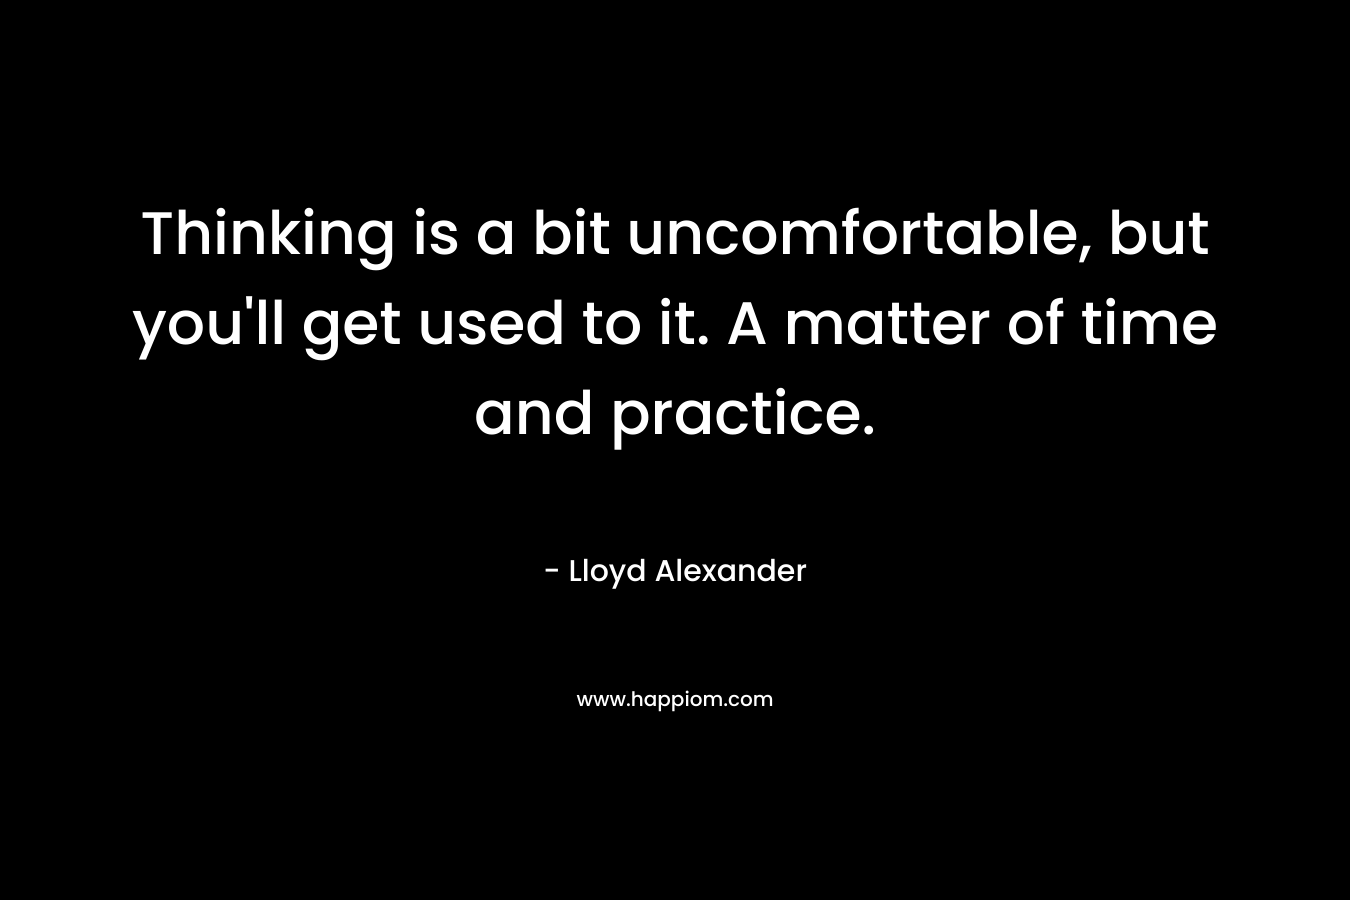 Thinking is a bit uncomfortable, but you’ll get used to it. A matter of time and practice. – Lloyd Alexander